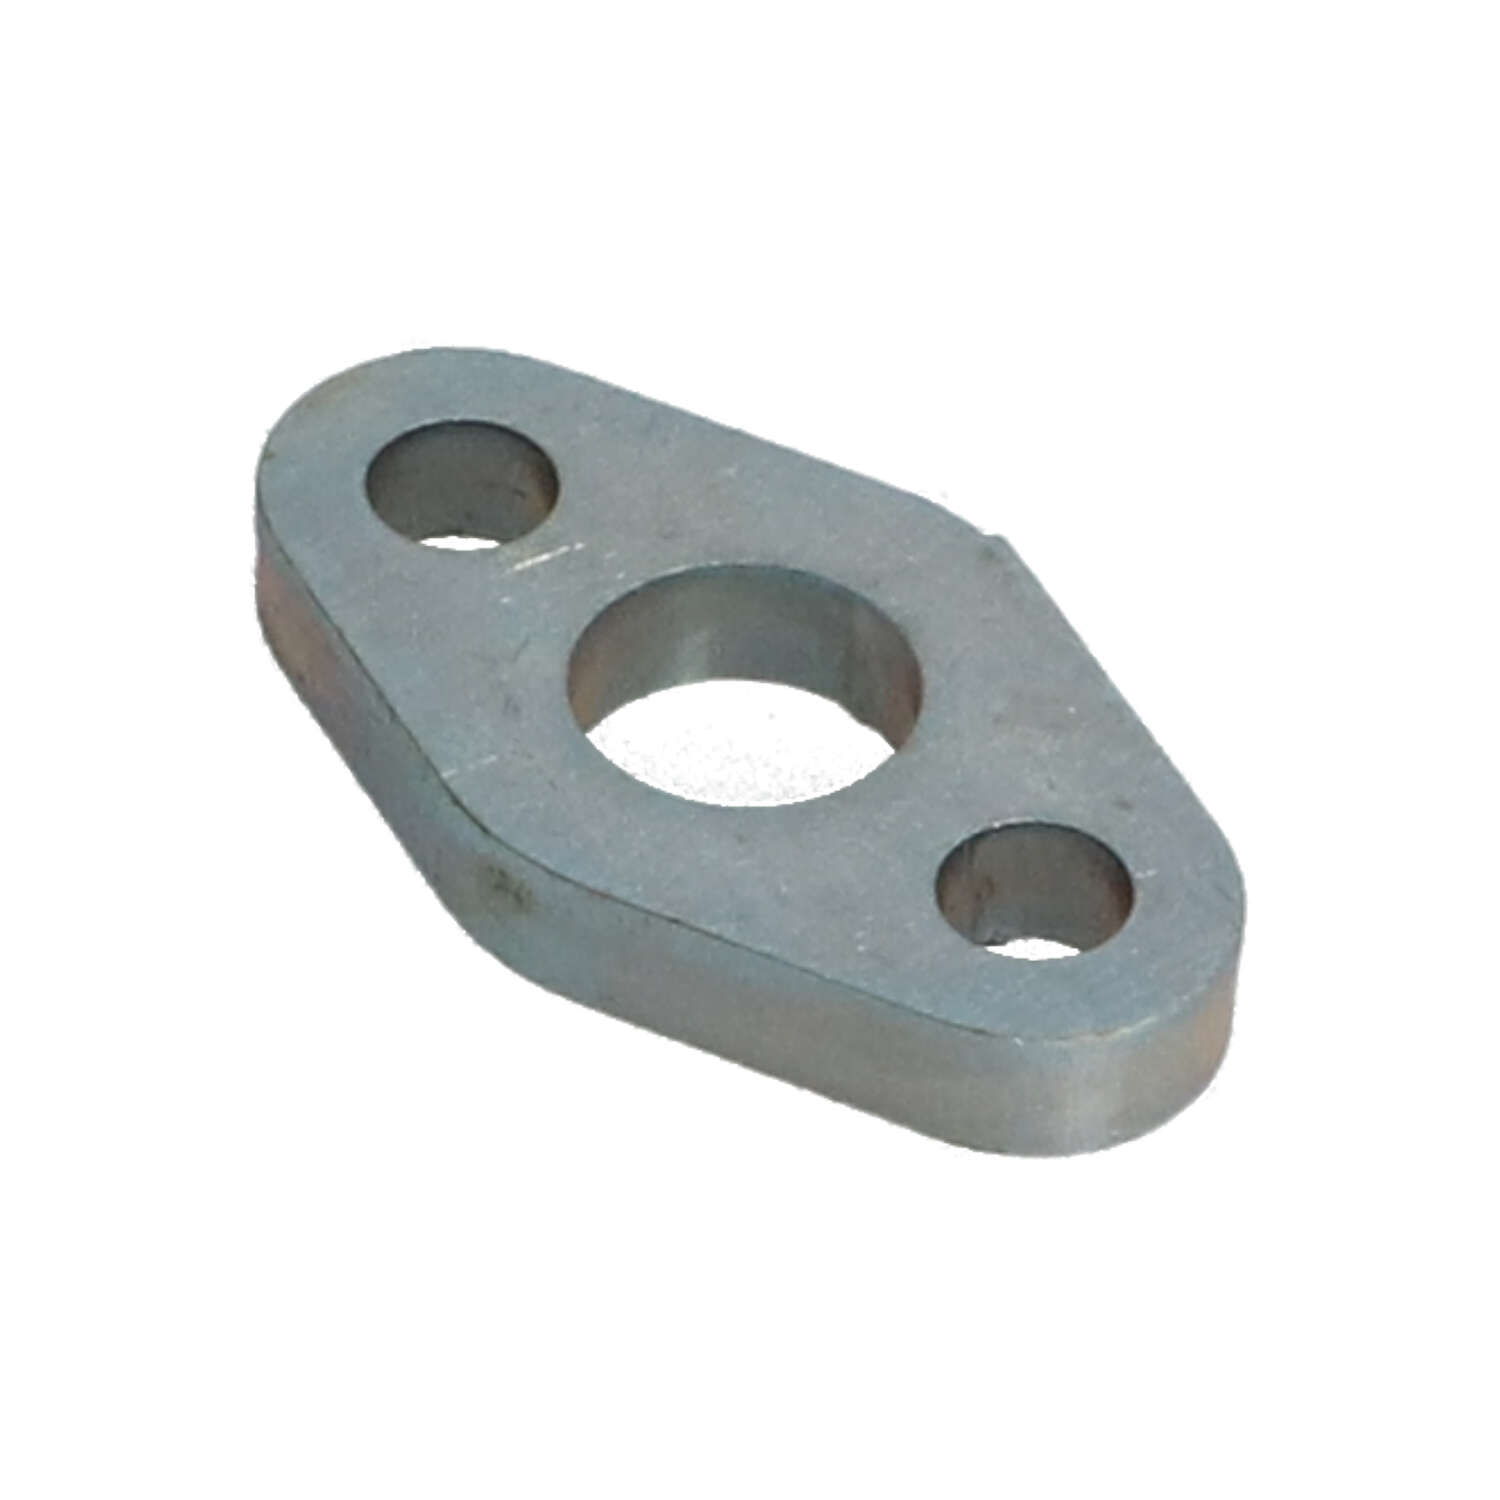 Outer Plate Fits for Ransomes (M8 bolt holes)